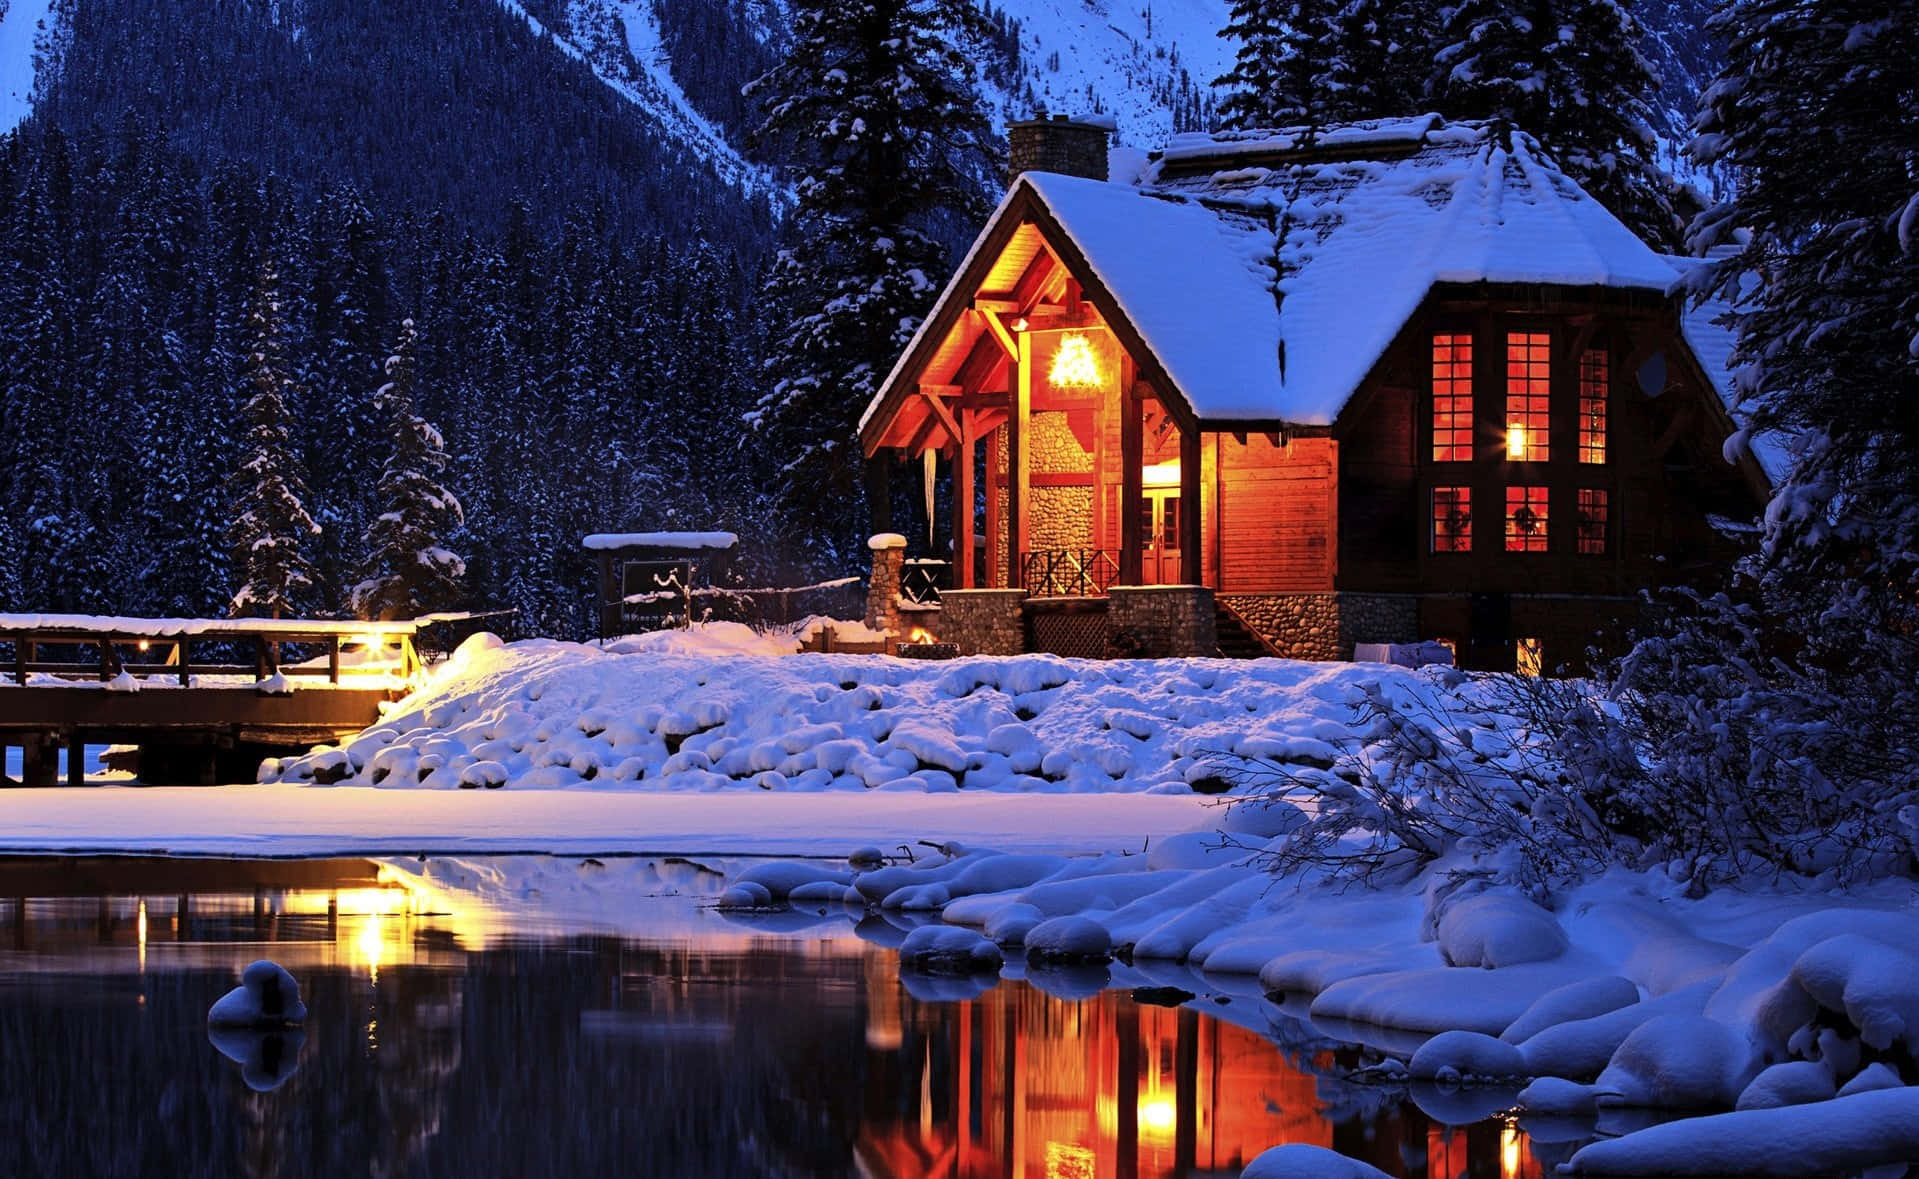 Cabin Covered In Snow At Night Background